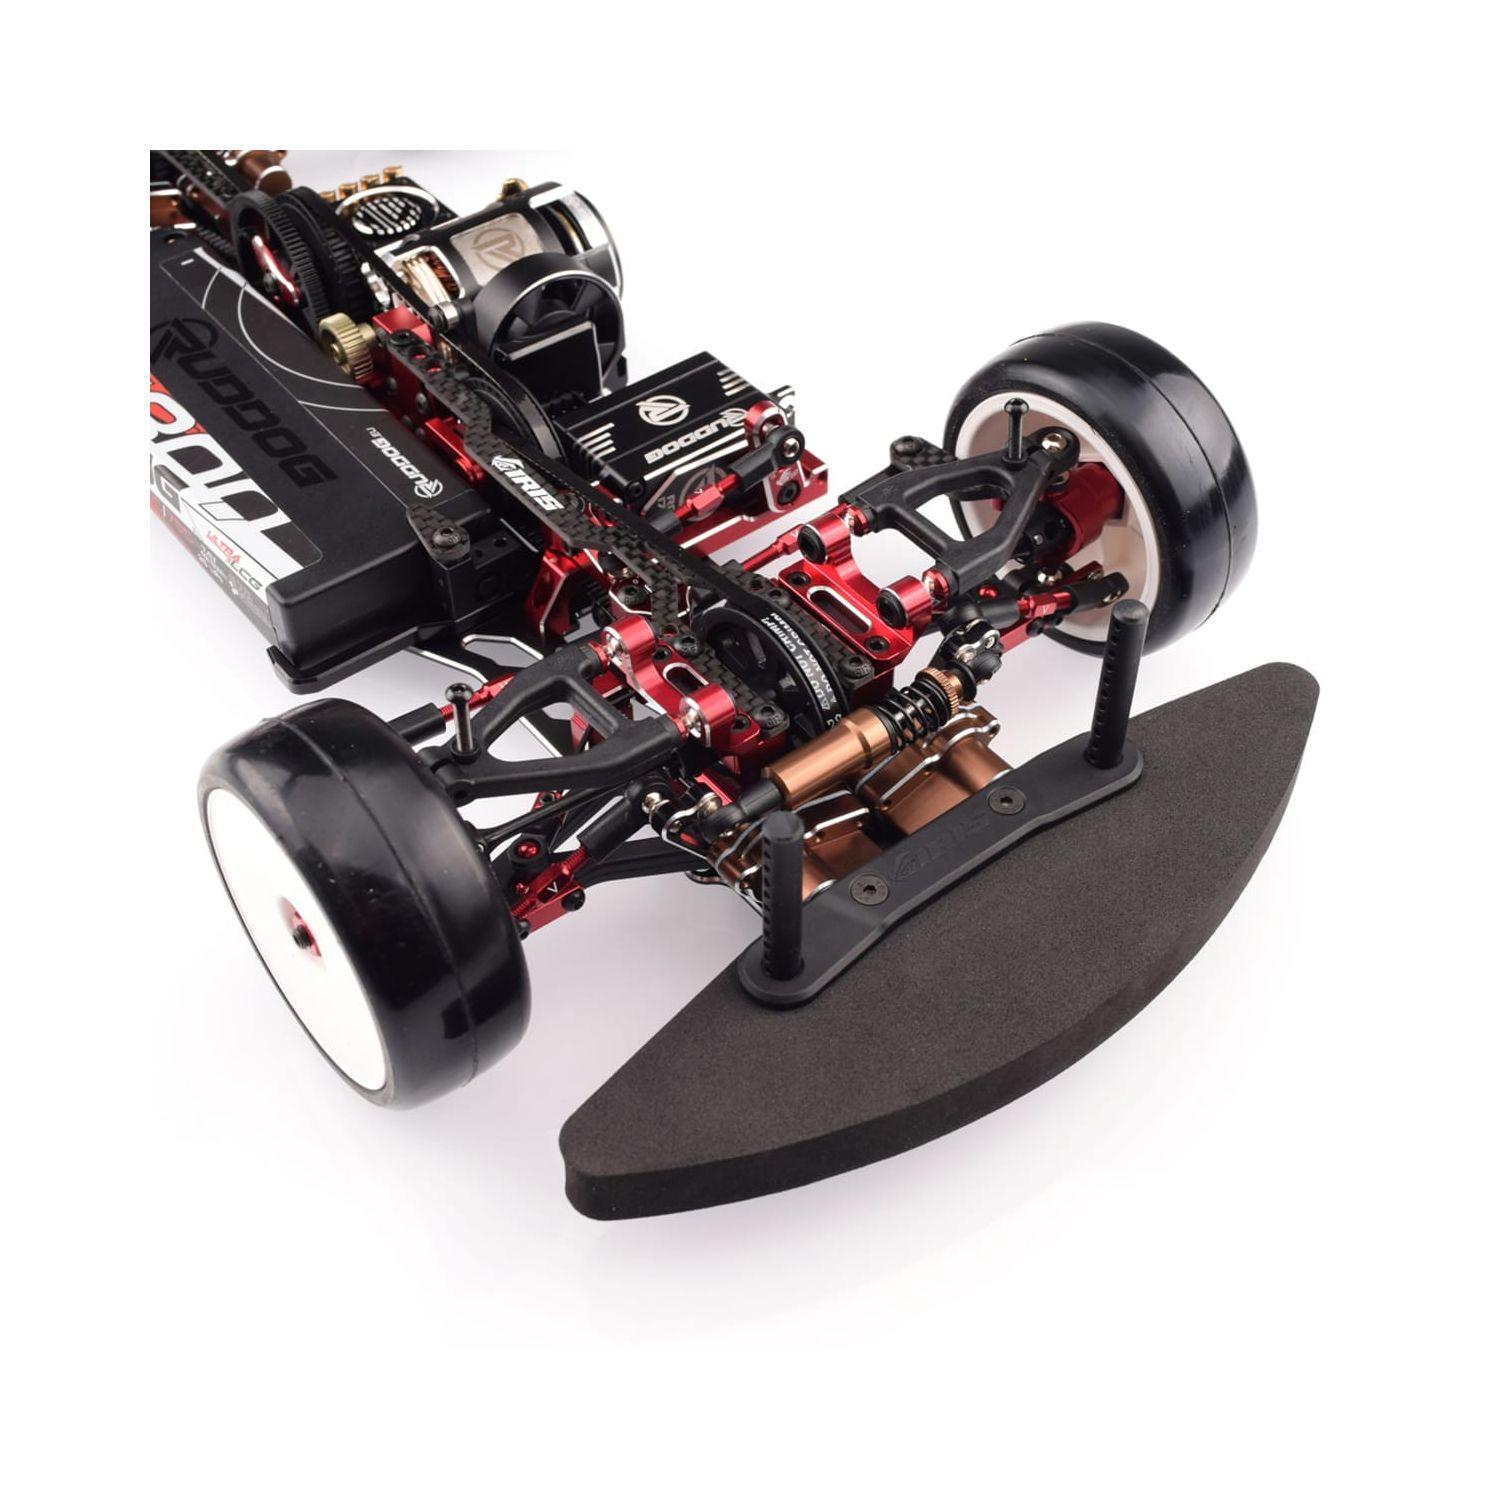 Iris Rc Car:  With an impressive range and exciting features, the Iris RC Car is perfect for RC enthusiasts of all ages.